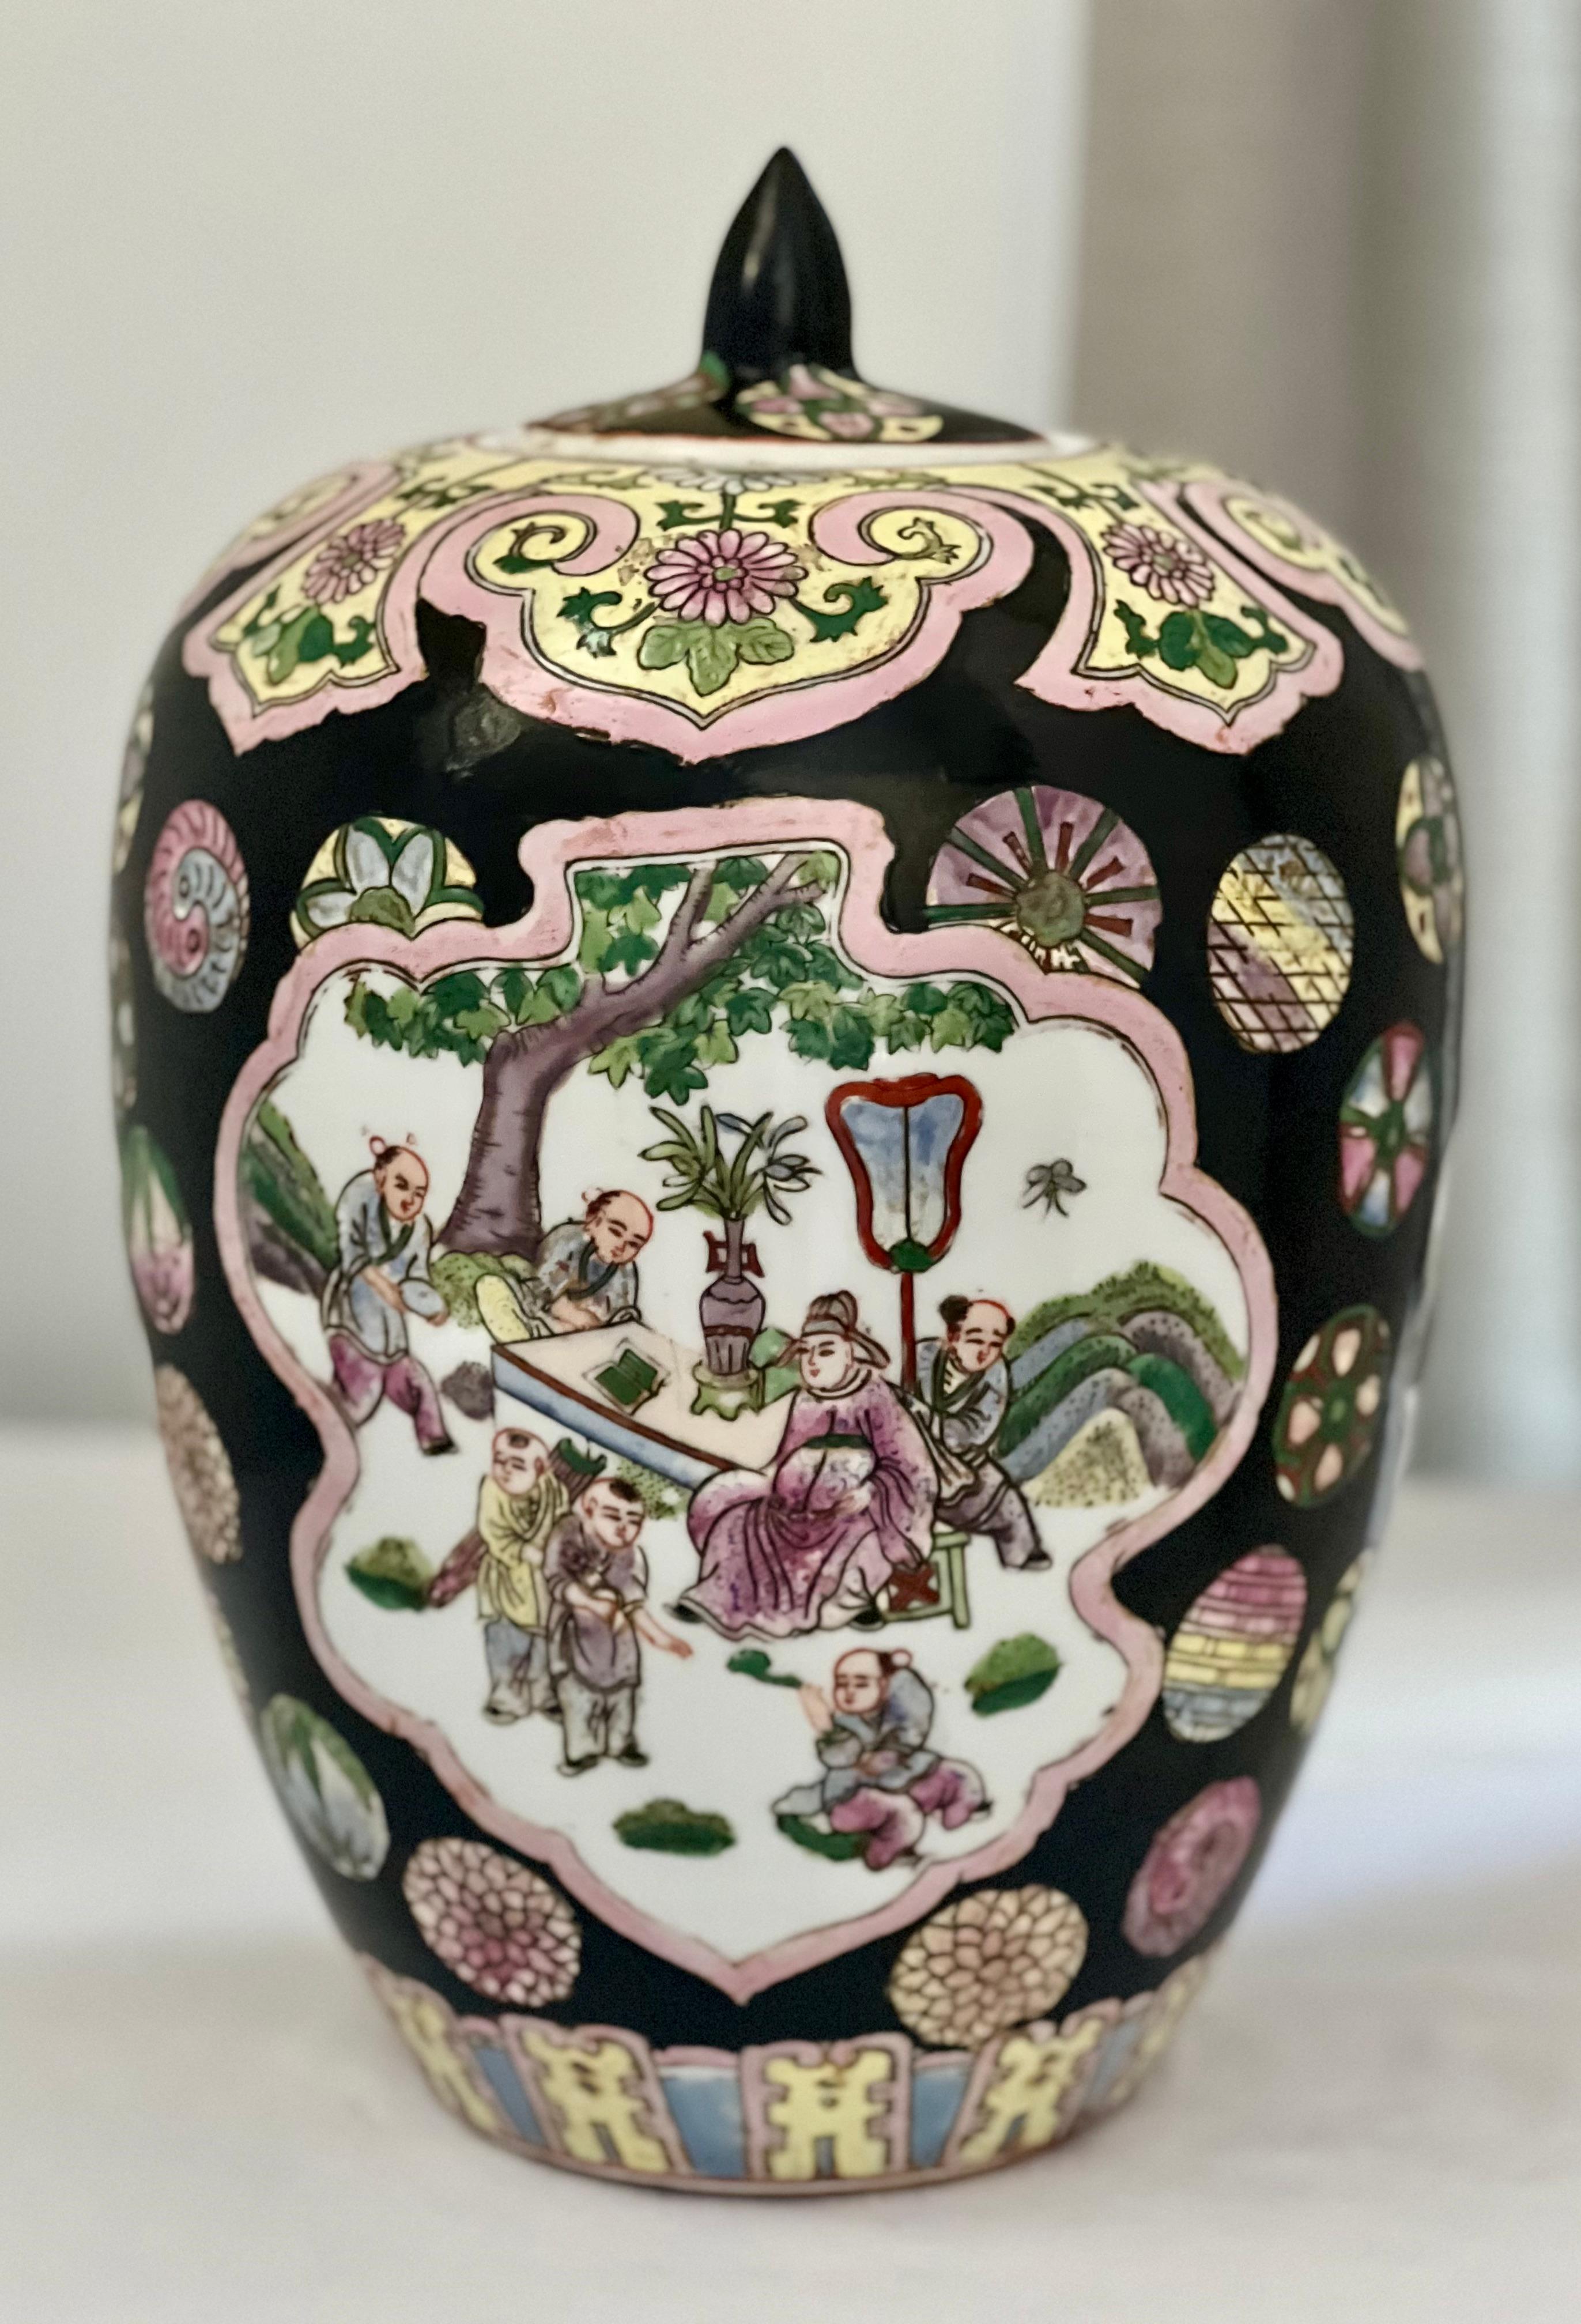 Vintage Chinese Famille Noire porcelain ginger jar with lid, c. 1920-30s.

Impressive ovoid shape jar hand painted with vibrant colors on matte black glaze. Each side features a picturesque scene of figures in a garden likely depicting ancestral